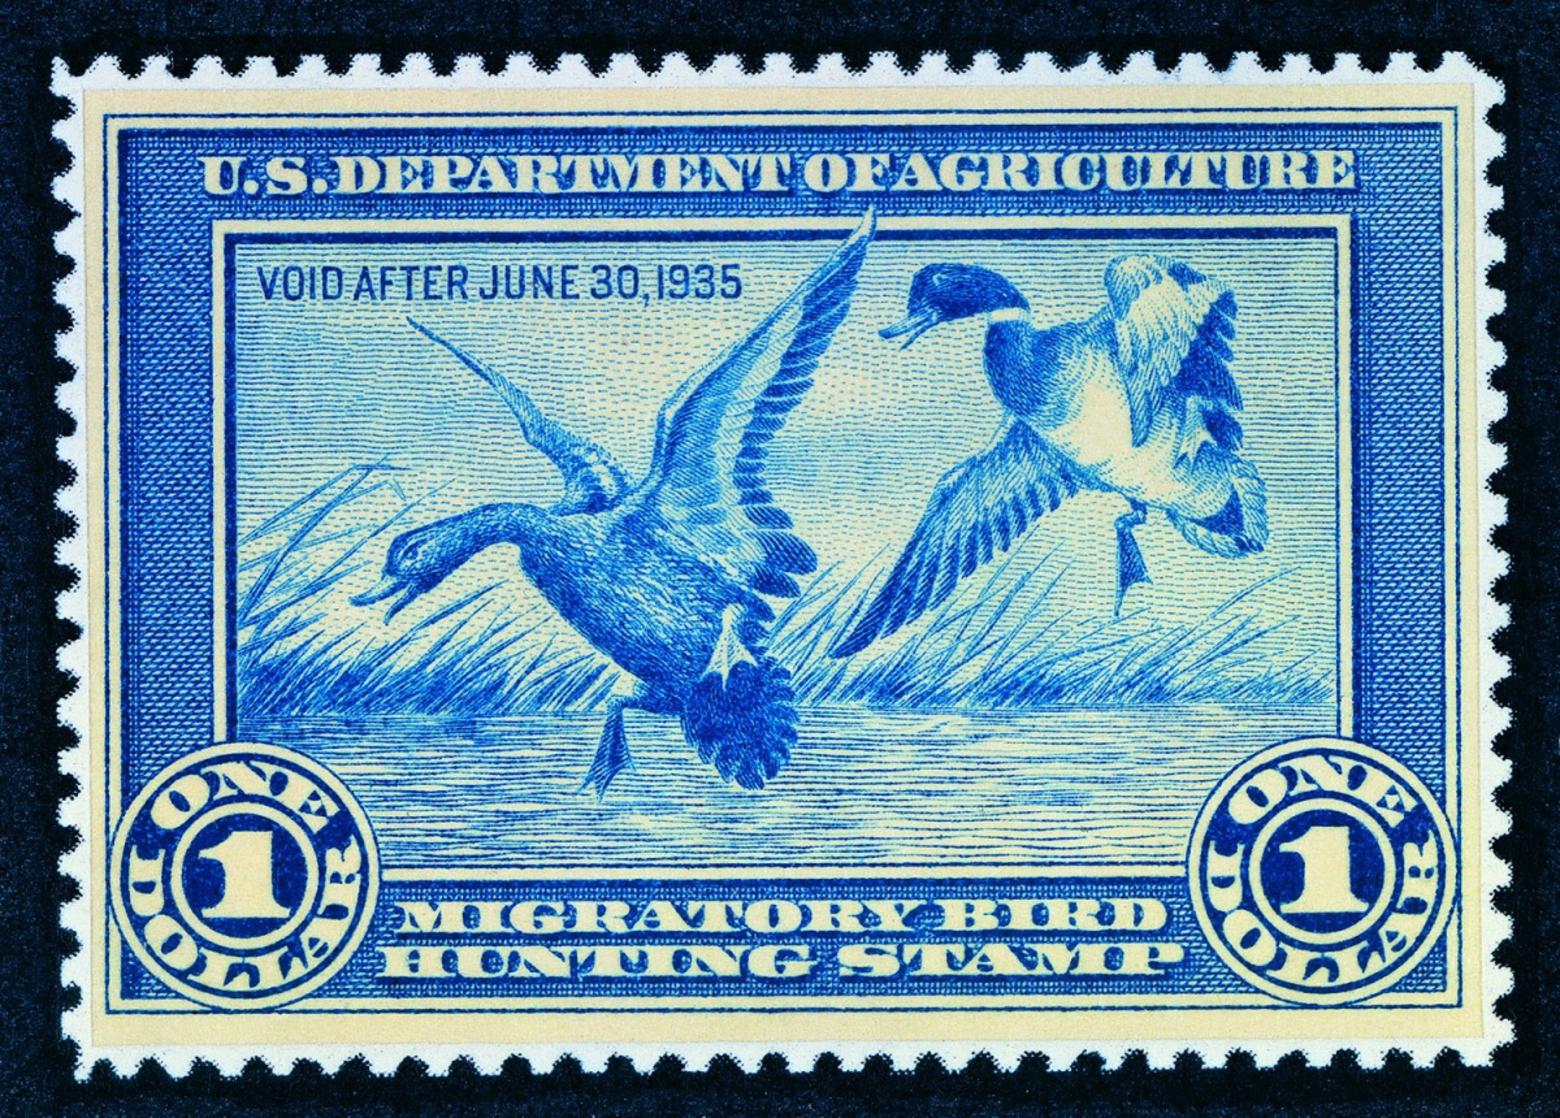 Since the mid 1930s, the sale of federal duck stamps have generated nearly $1 billion for wetlands conservation, including the protection of six million acres of land that benefits many hundreds of species. It's one of the most successful conservation fundraisers on the planet. But as waterfowl hunter numbers decline, what kinds of alternative funding sources will there be to keep the benefits going?